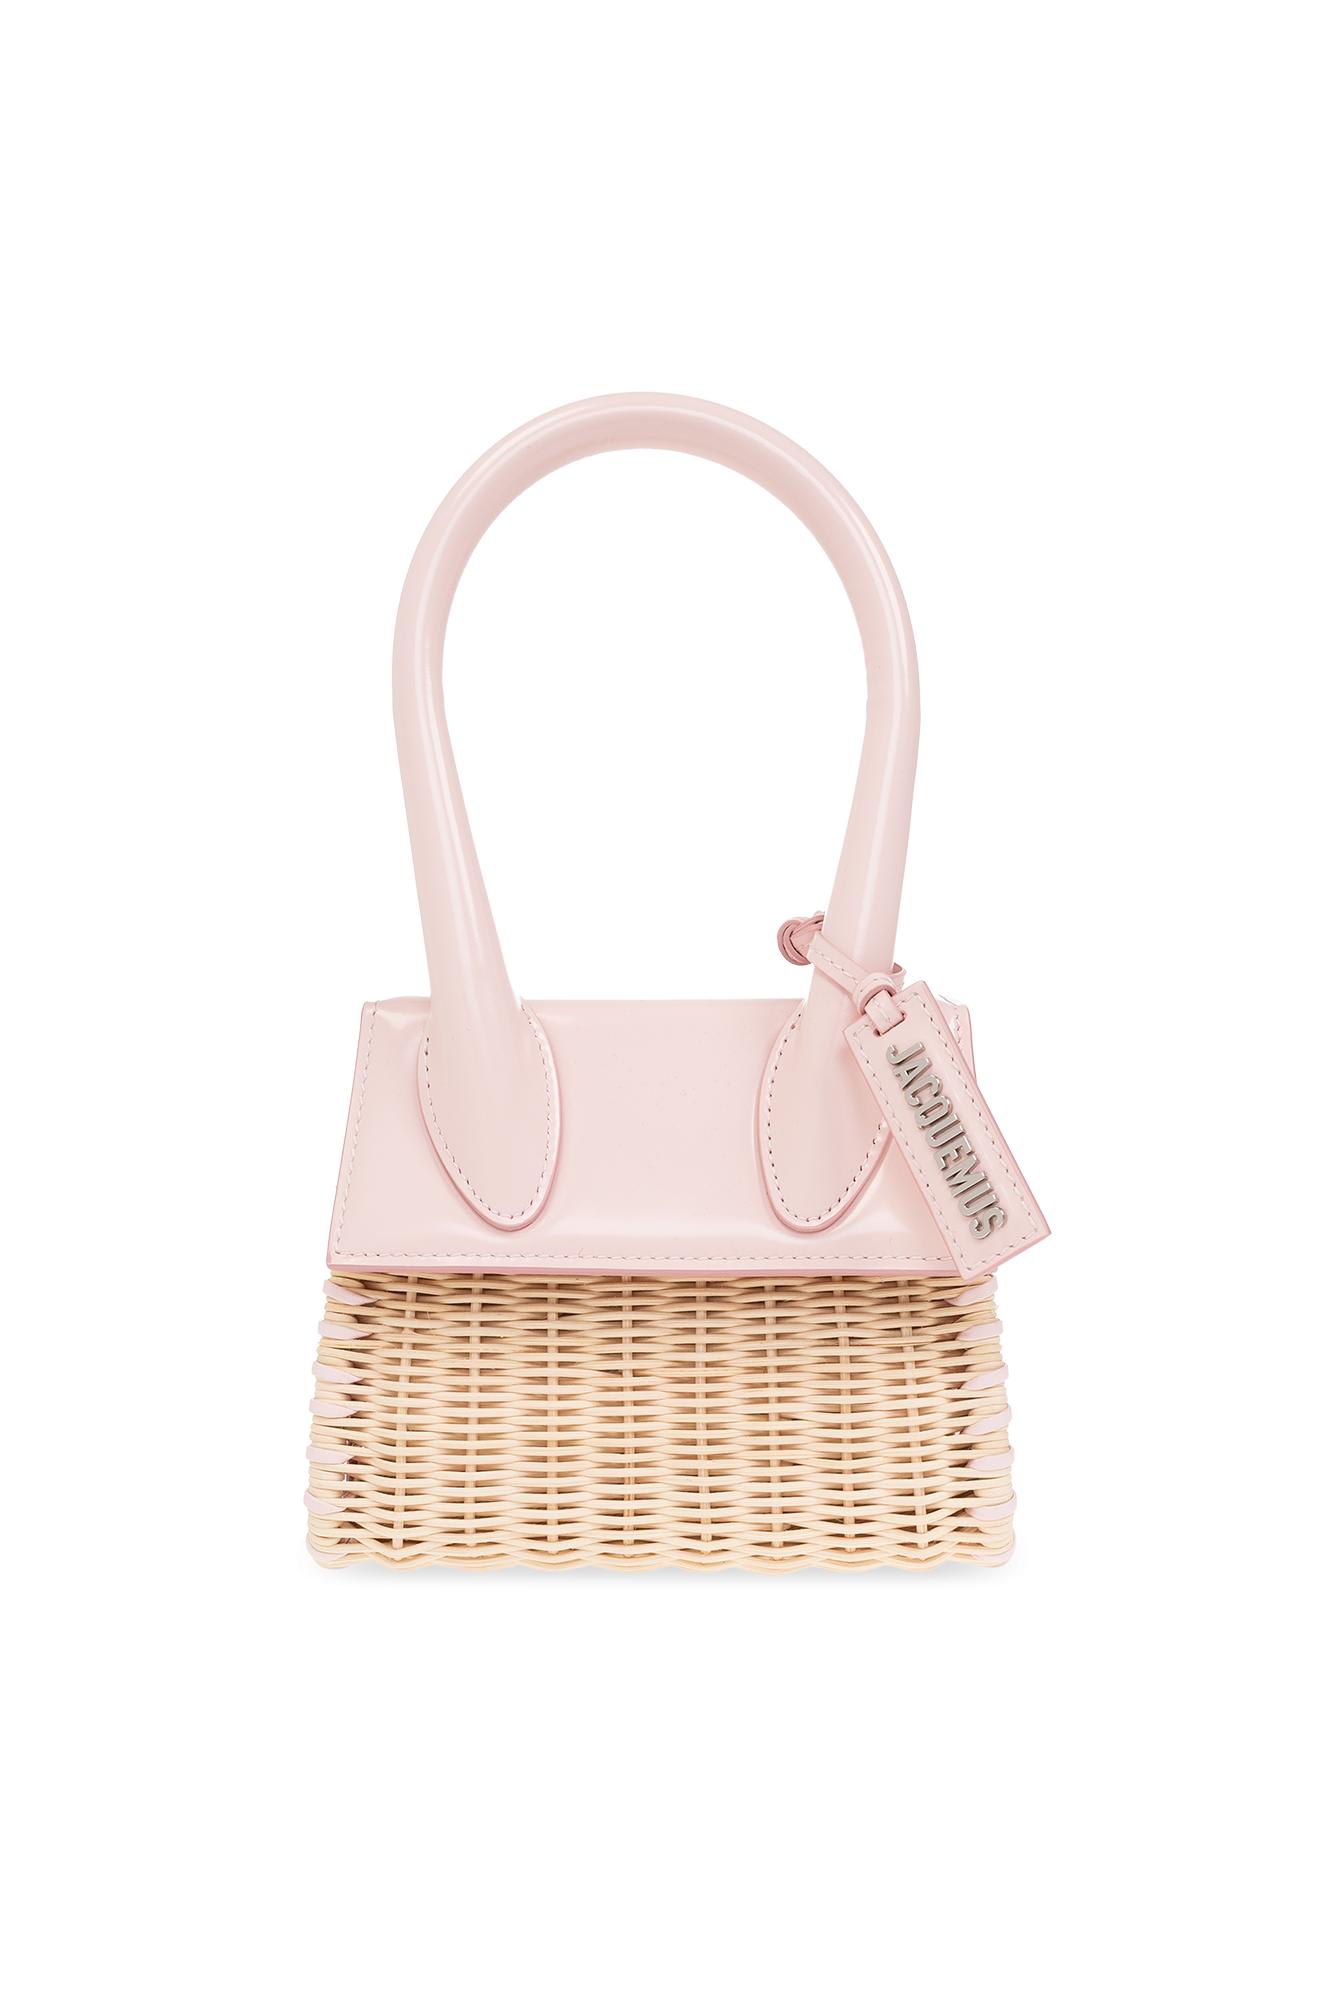 Jacquemus Le Chiquito Micro Textured Leather Tote White